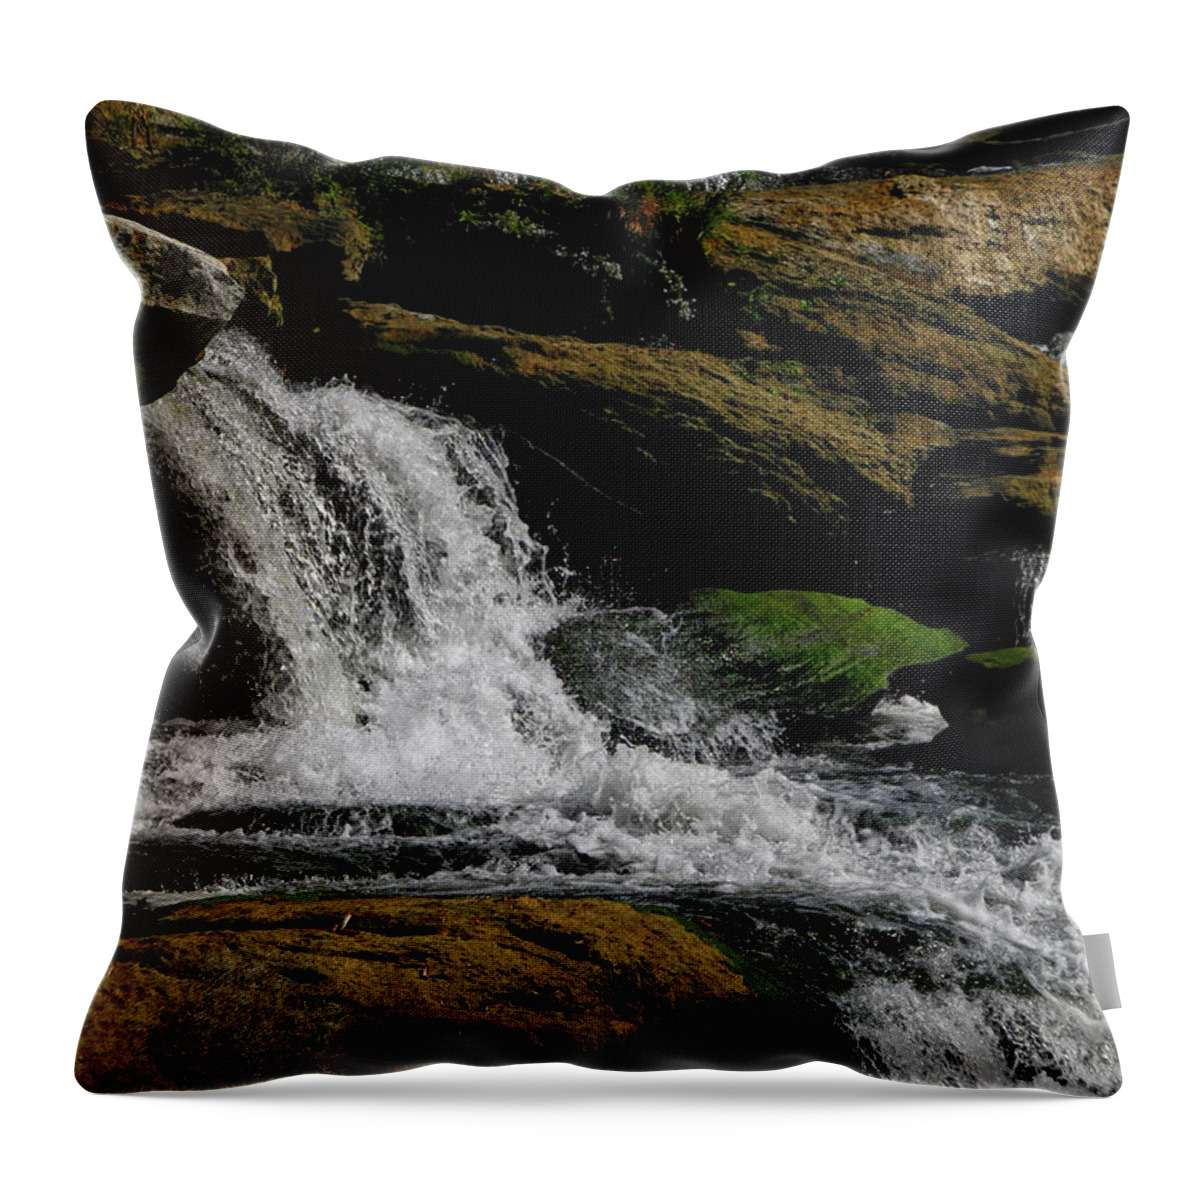 Great Falls Throw Pillow featuring the photograph Great Falls 2 by Raymond Salani III